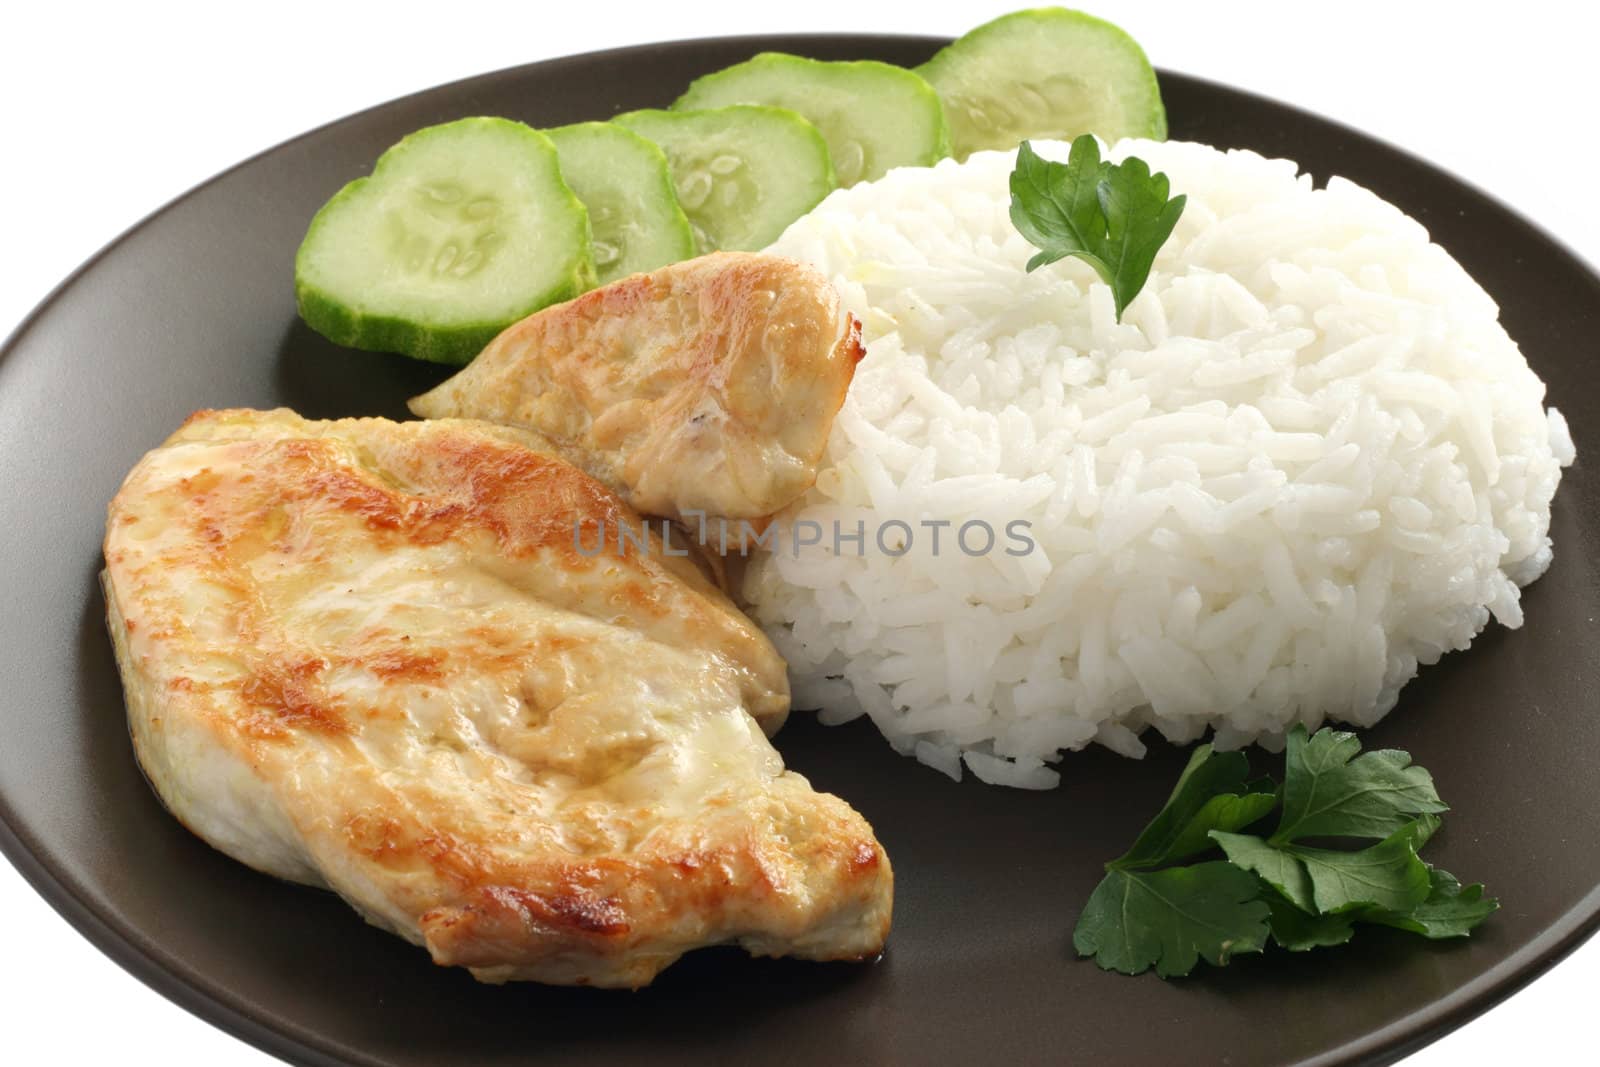 fried chicken with rice